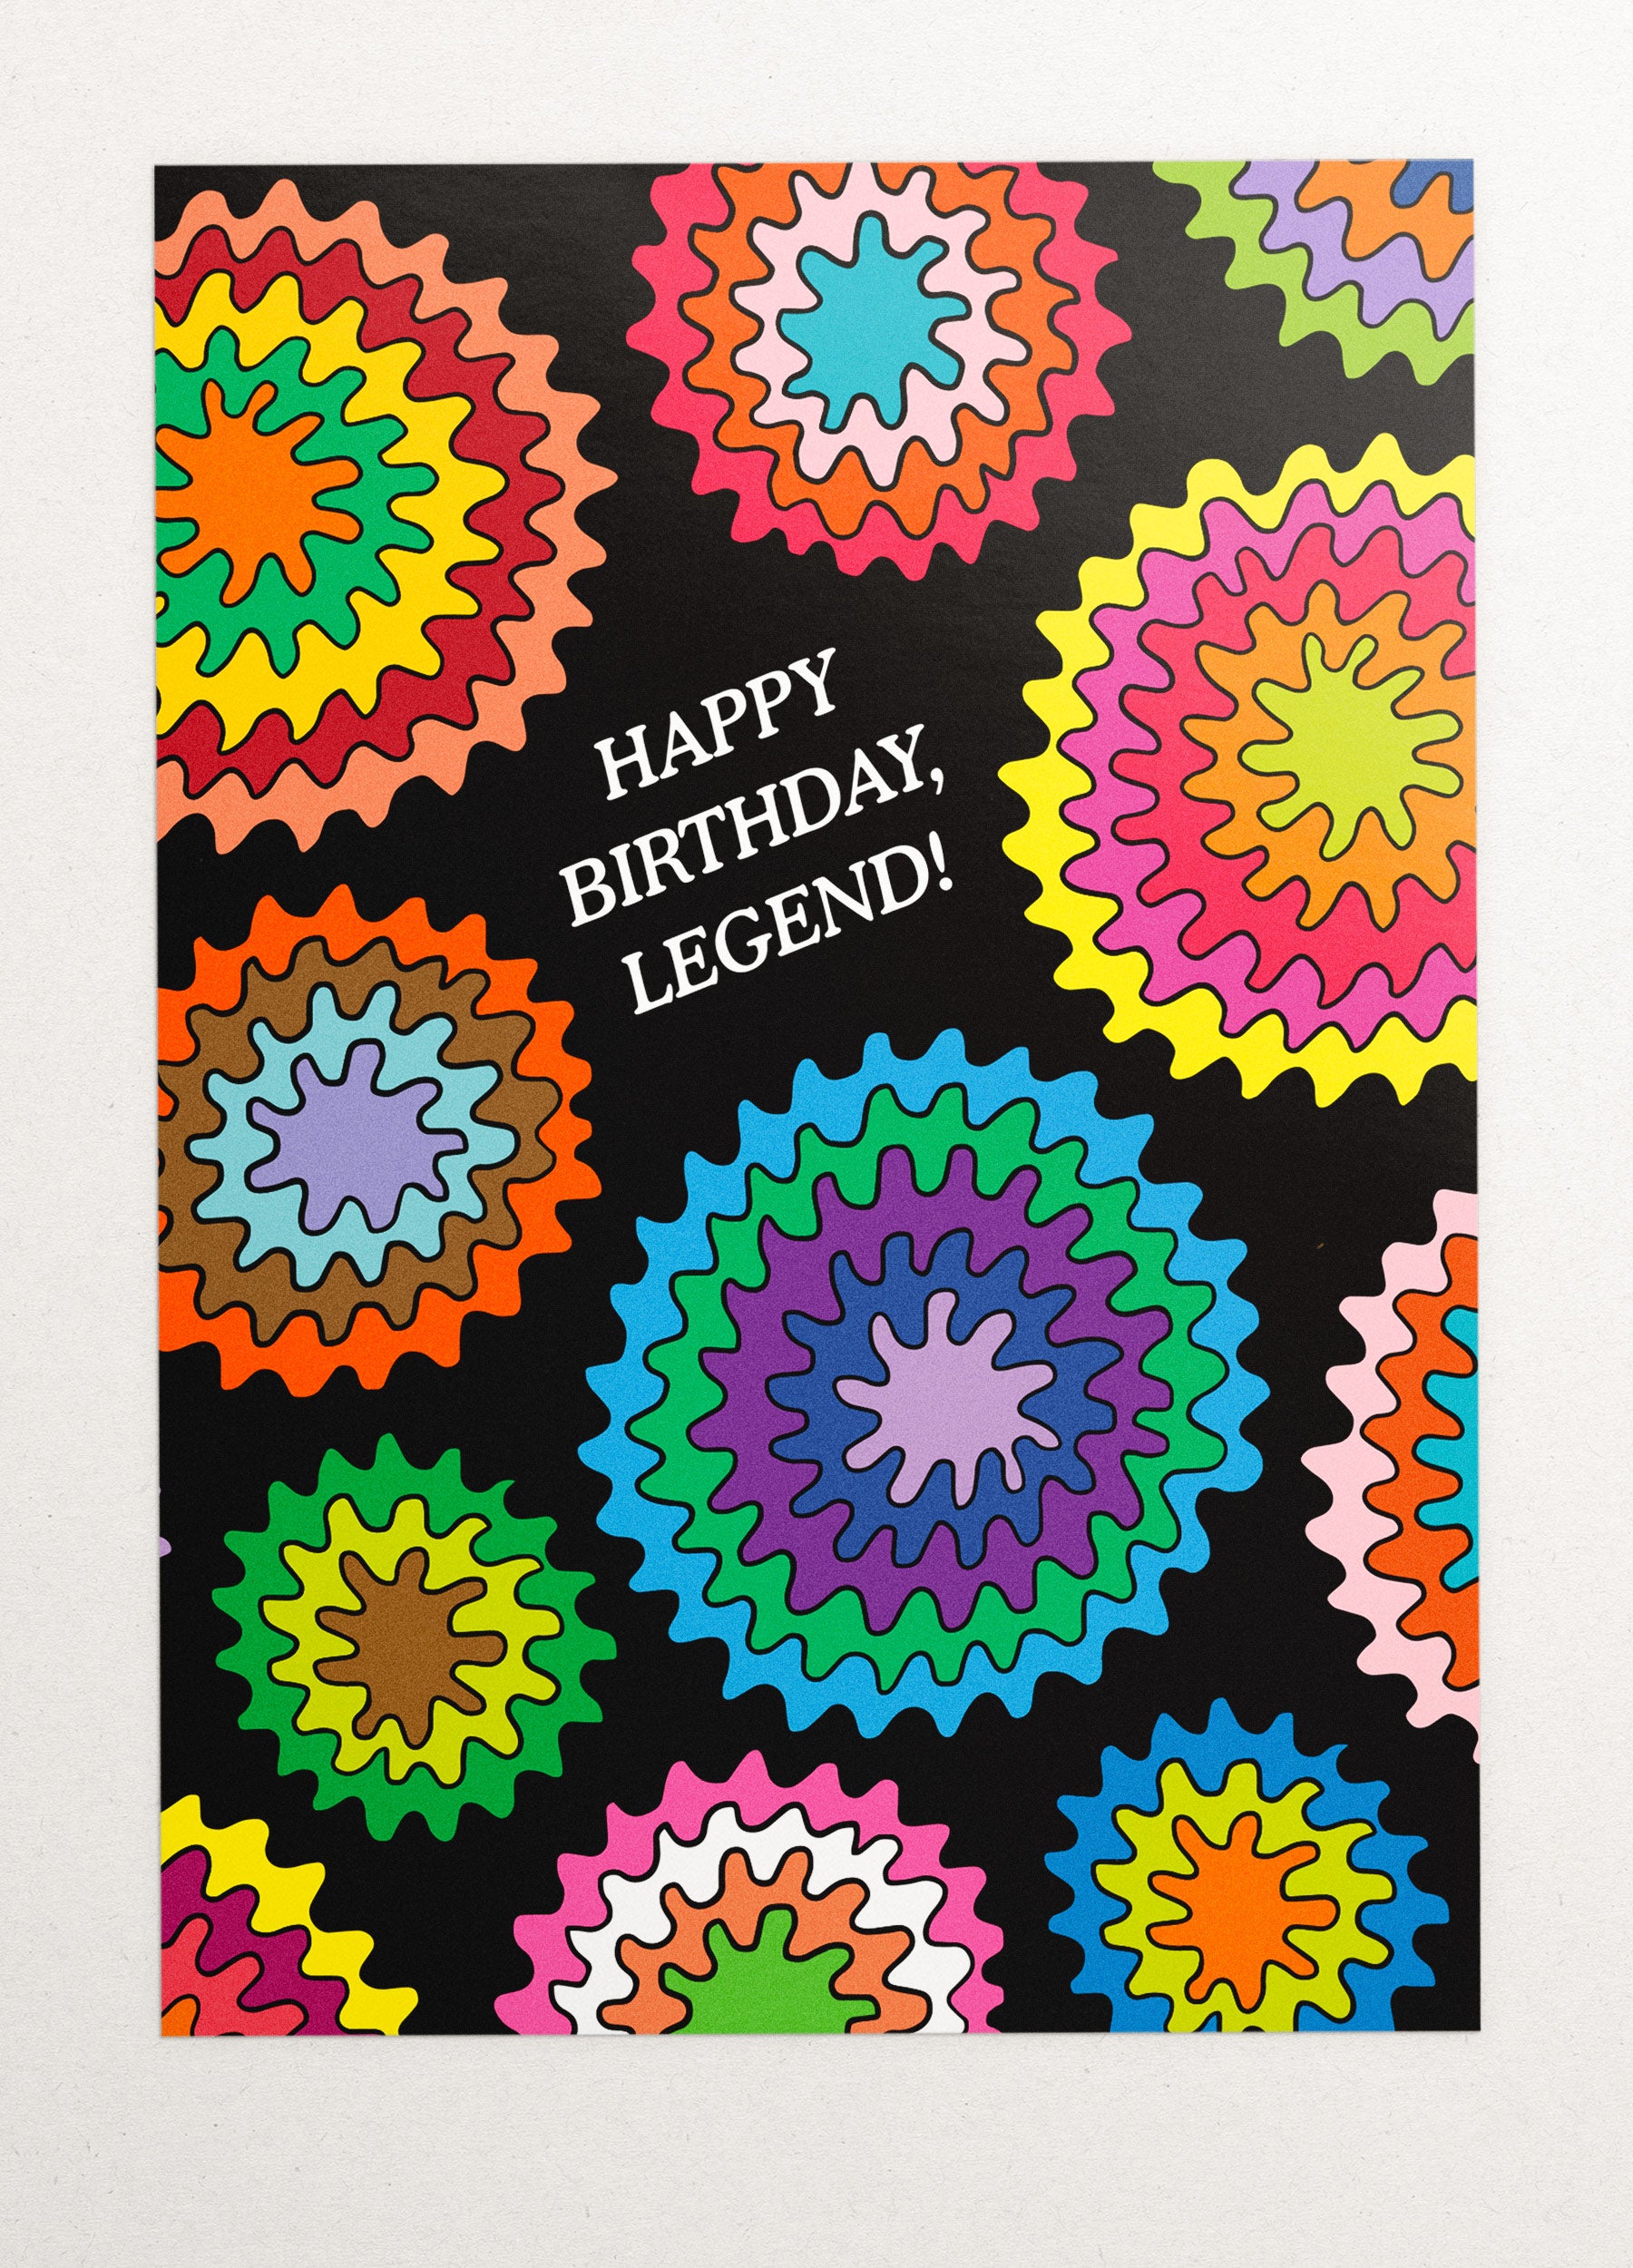 This image is a greeting card by Kiosk that has a black background and a circular wavey burst design. The design has different burst patterns and shapes in pink, orange, green, blue, and purple. The card also has a white text that says “Happy Birthday, Legend!” in a fun and casual font. The card has a playful and cheerful design that conveys a message of celebration and compliments for your birthday. 🎂